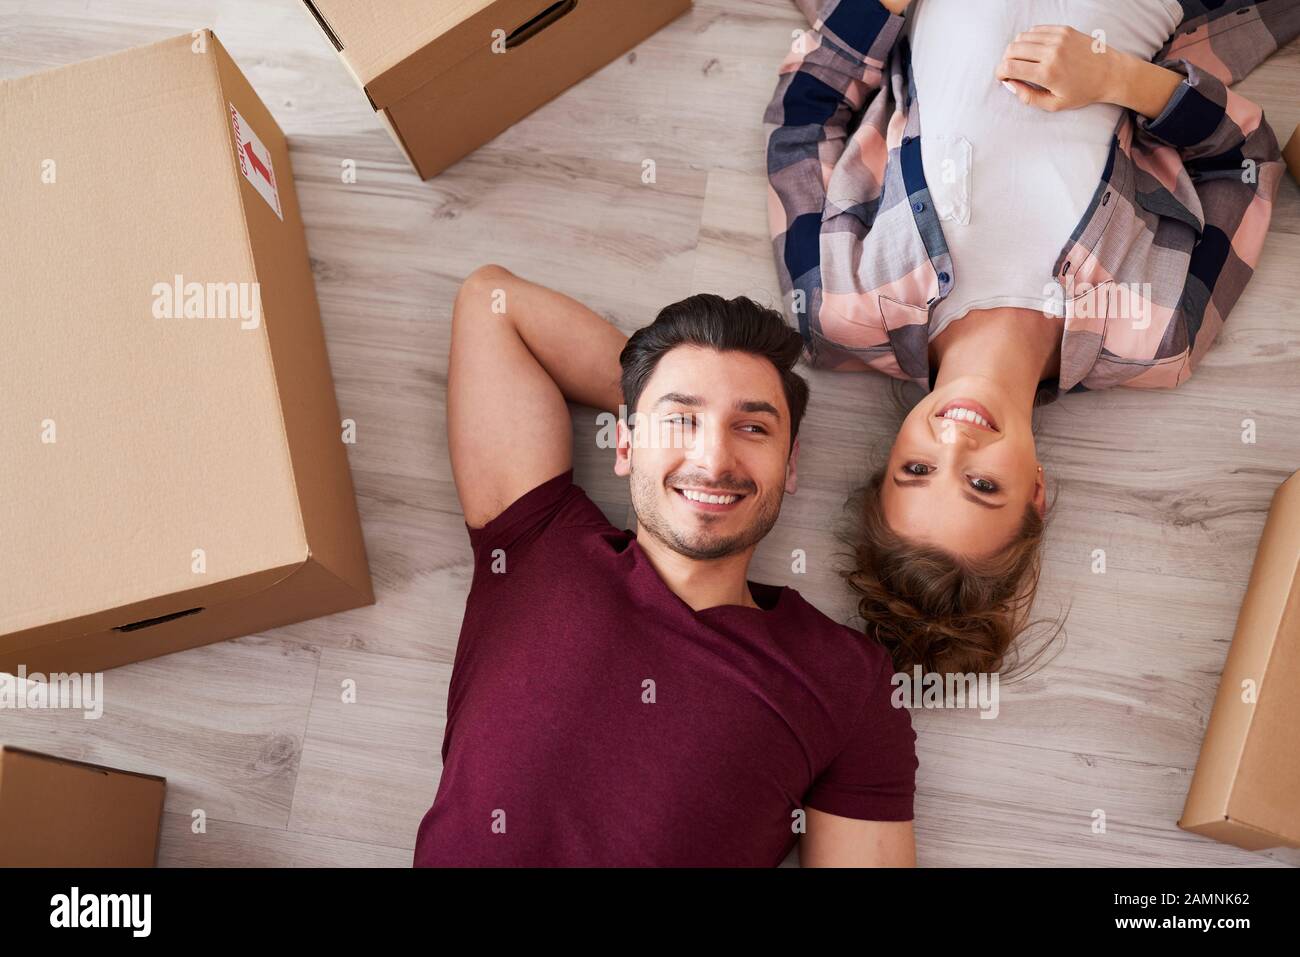 Portrait of smiling couple taking break from moving home Stock Photo